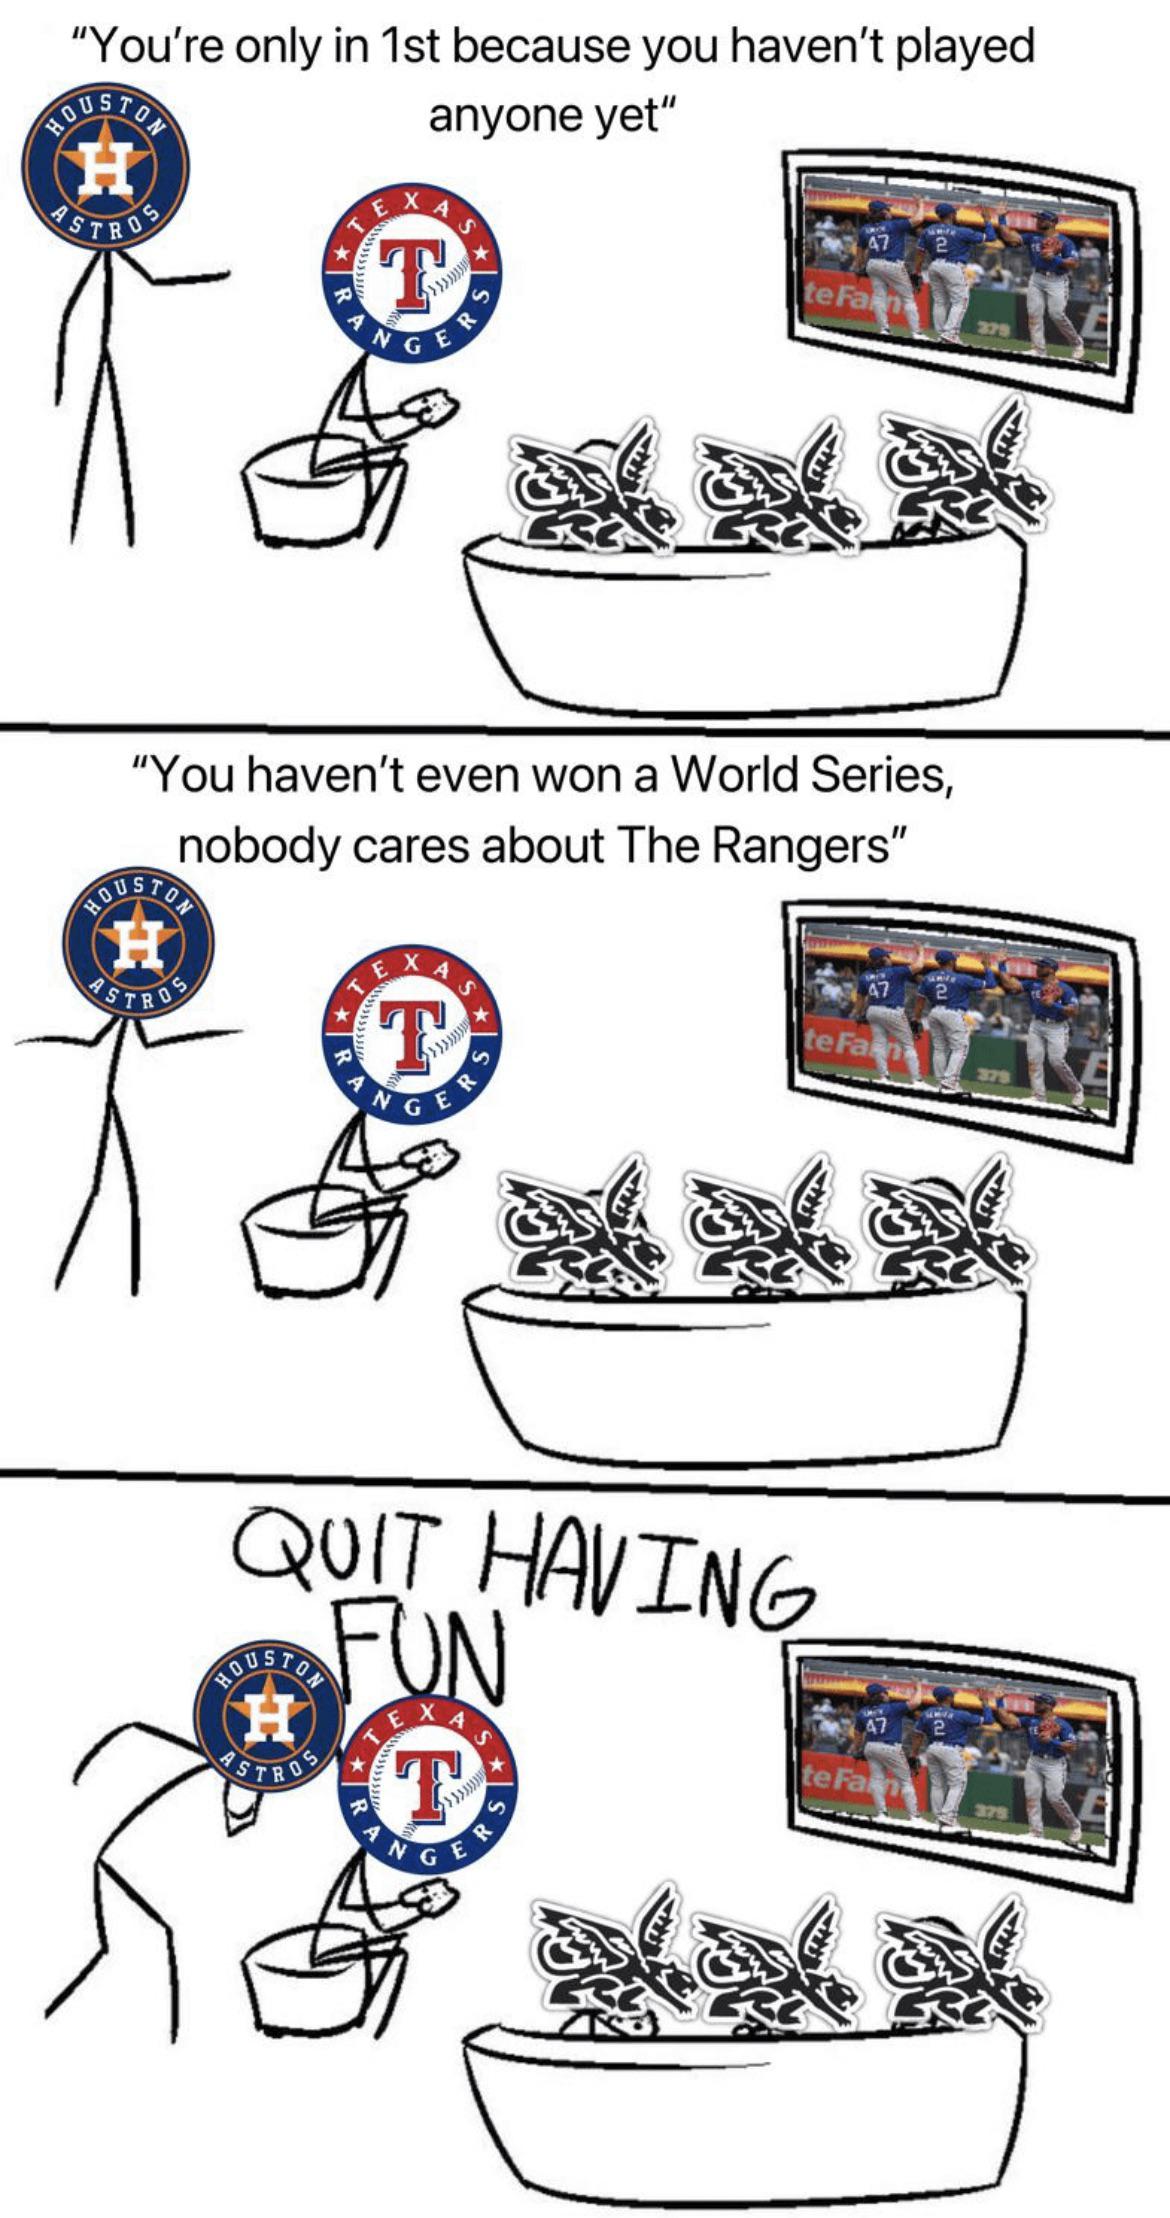 13sxe1i-Lol_leave_us_rangers_fans_alone_they_haven_t_been_first_in_a_long_time-xvyabjiz9c2b1.jpg